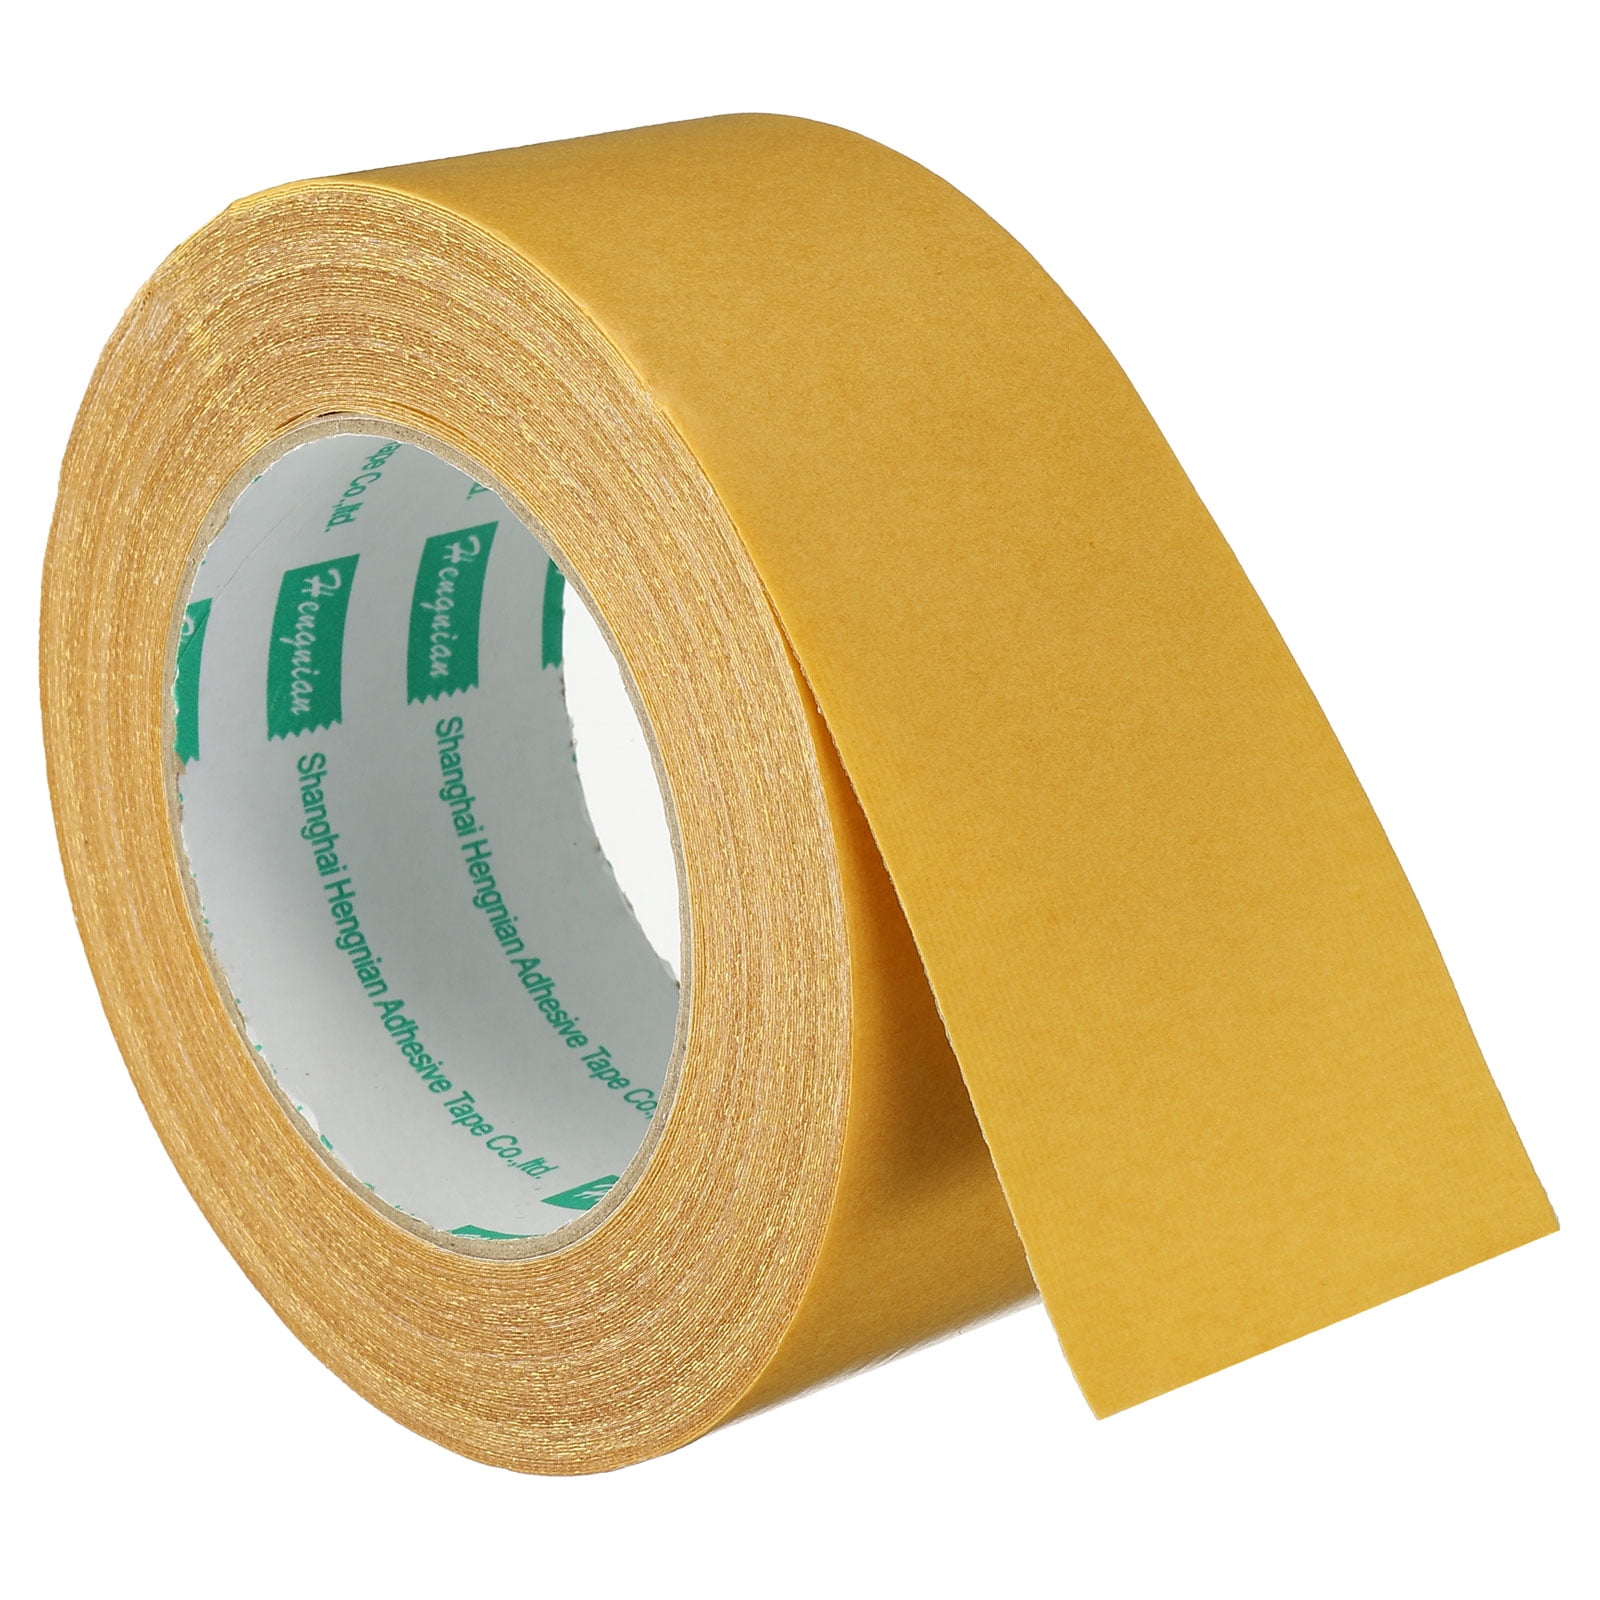 wofedyo packing tape double sided fabric tape heavy duty durable duct cloth  tape easy to without super sticky for carpets rugs and clothing etc 